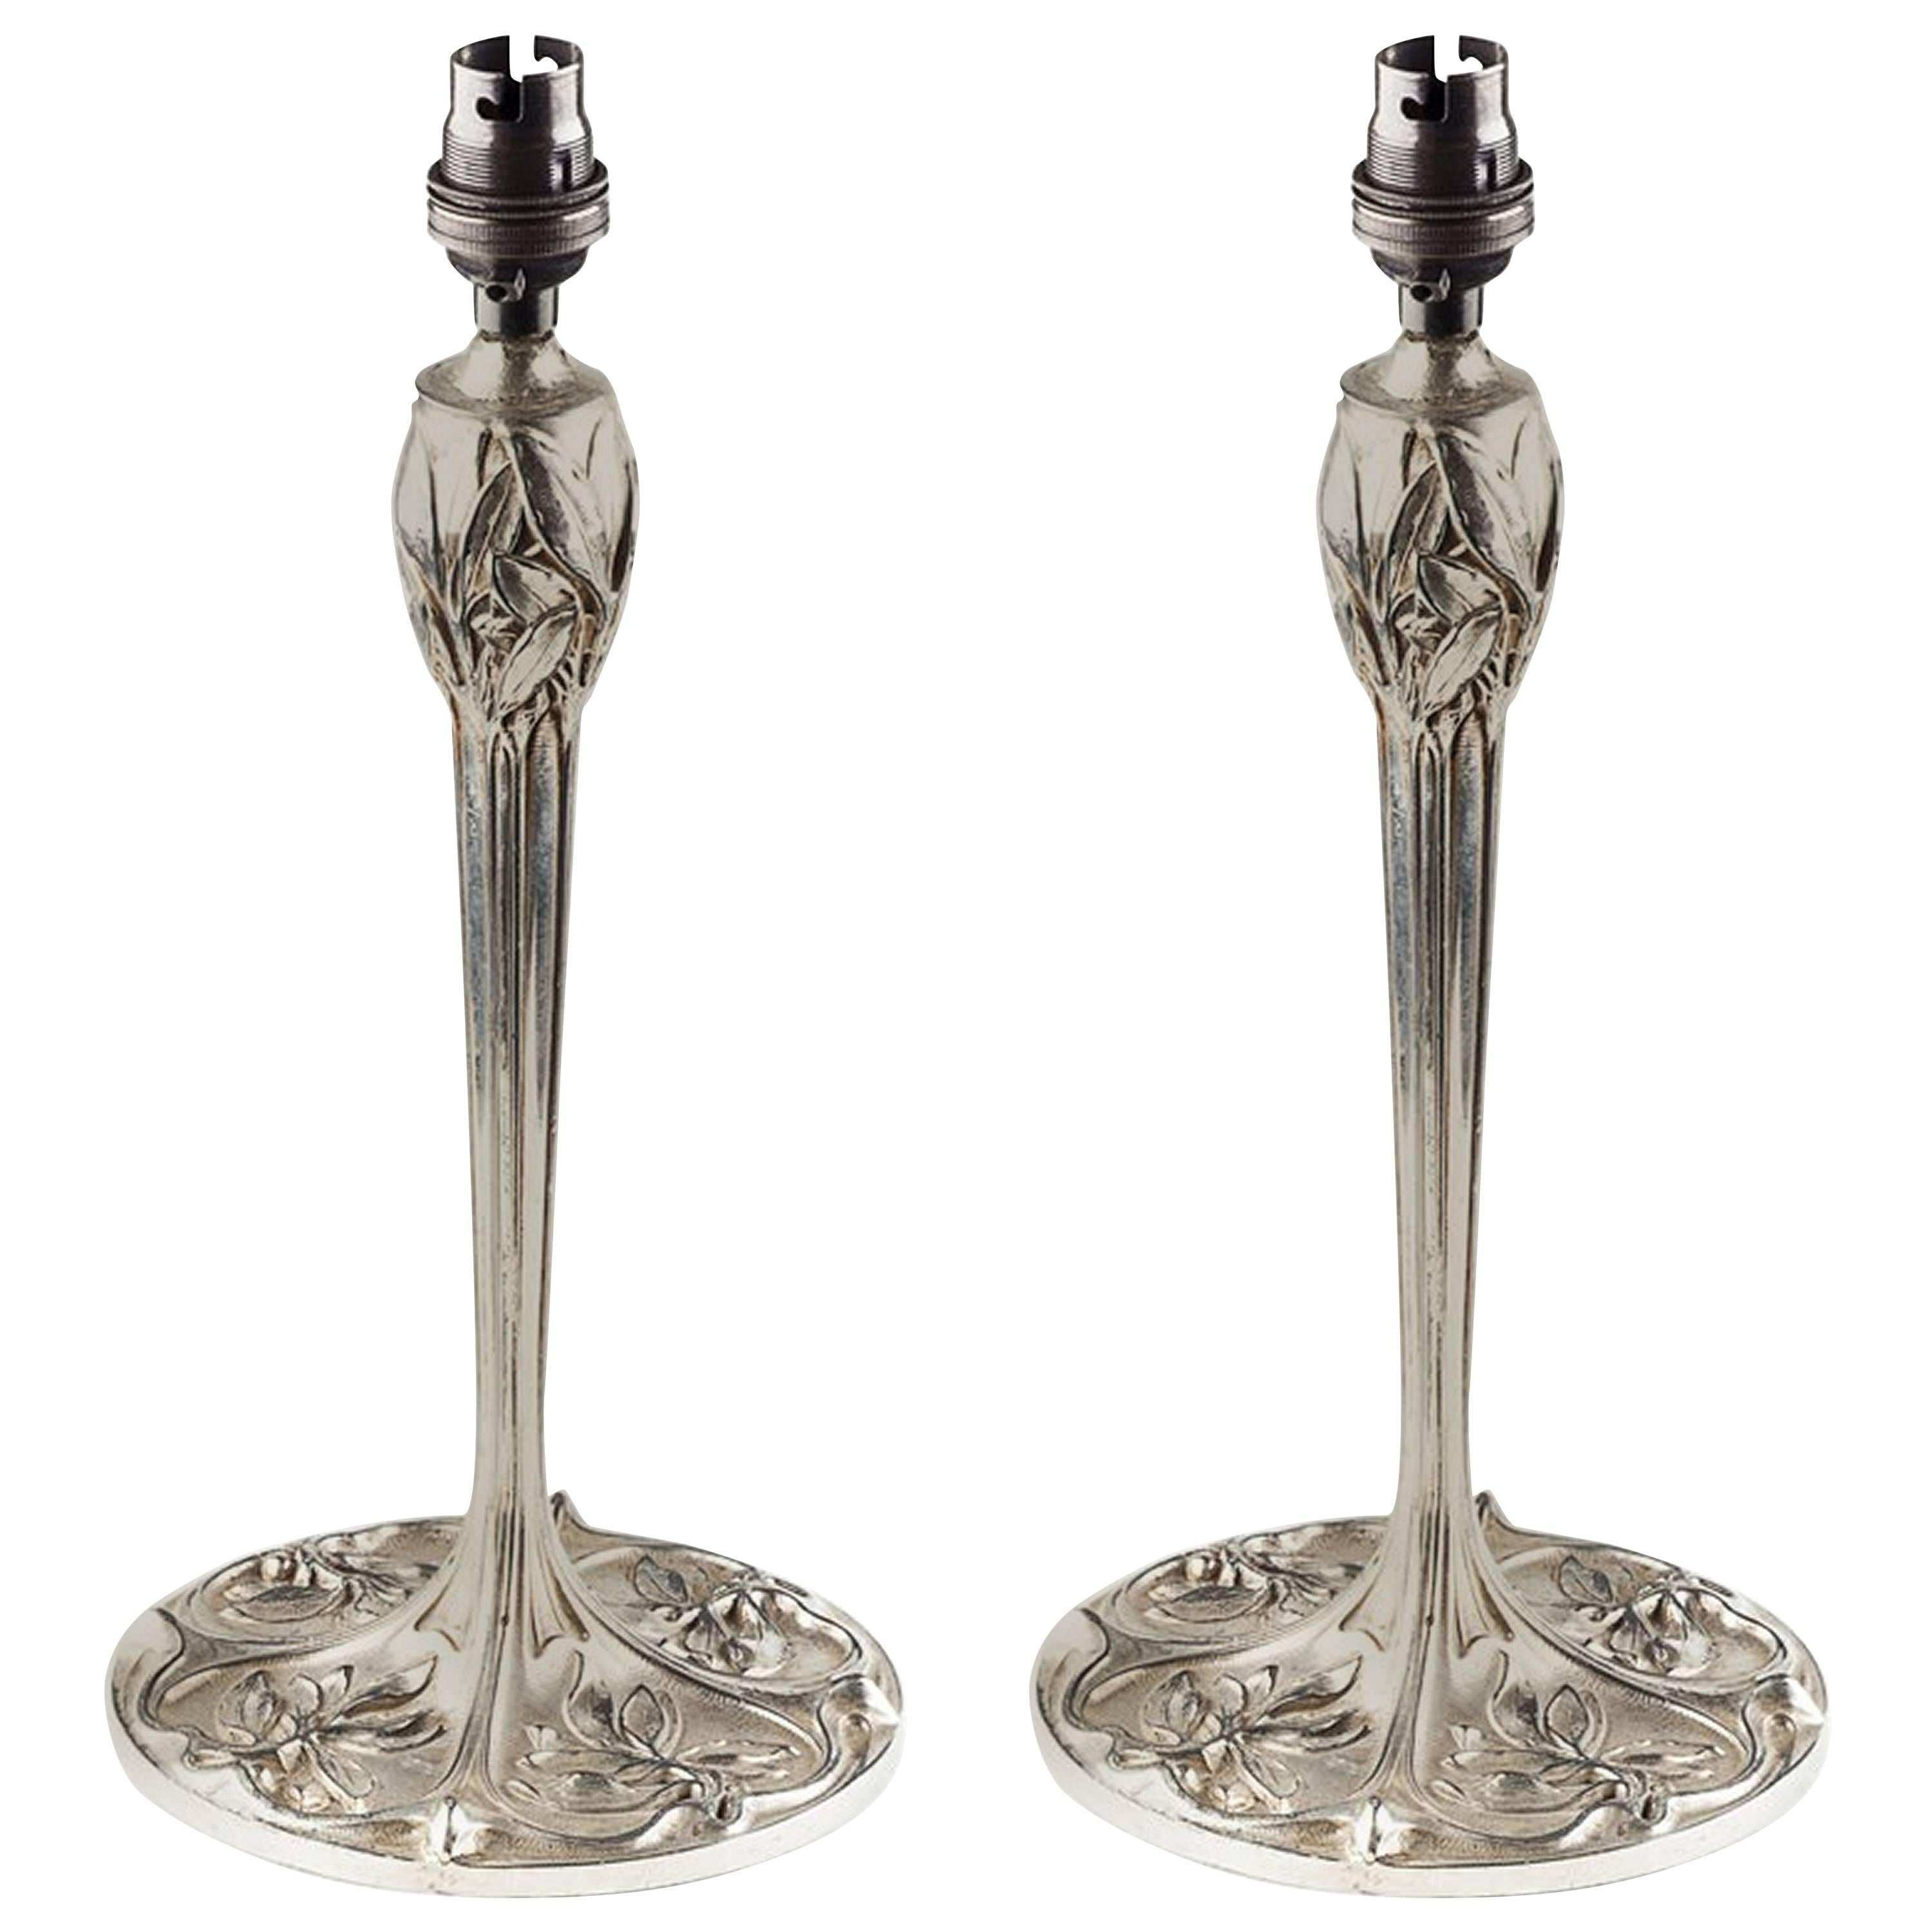 A Pair of Arts and Crafts Silver Plated Table Lamps With Stylised Floral Details For Sale